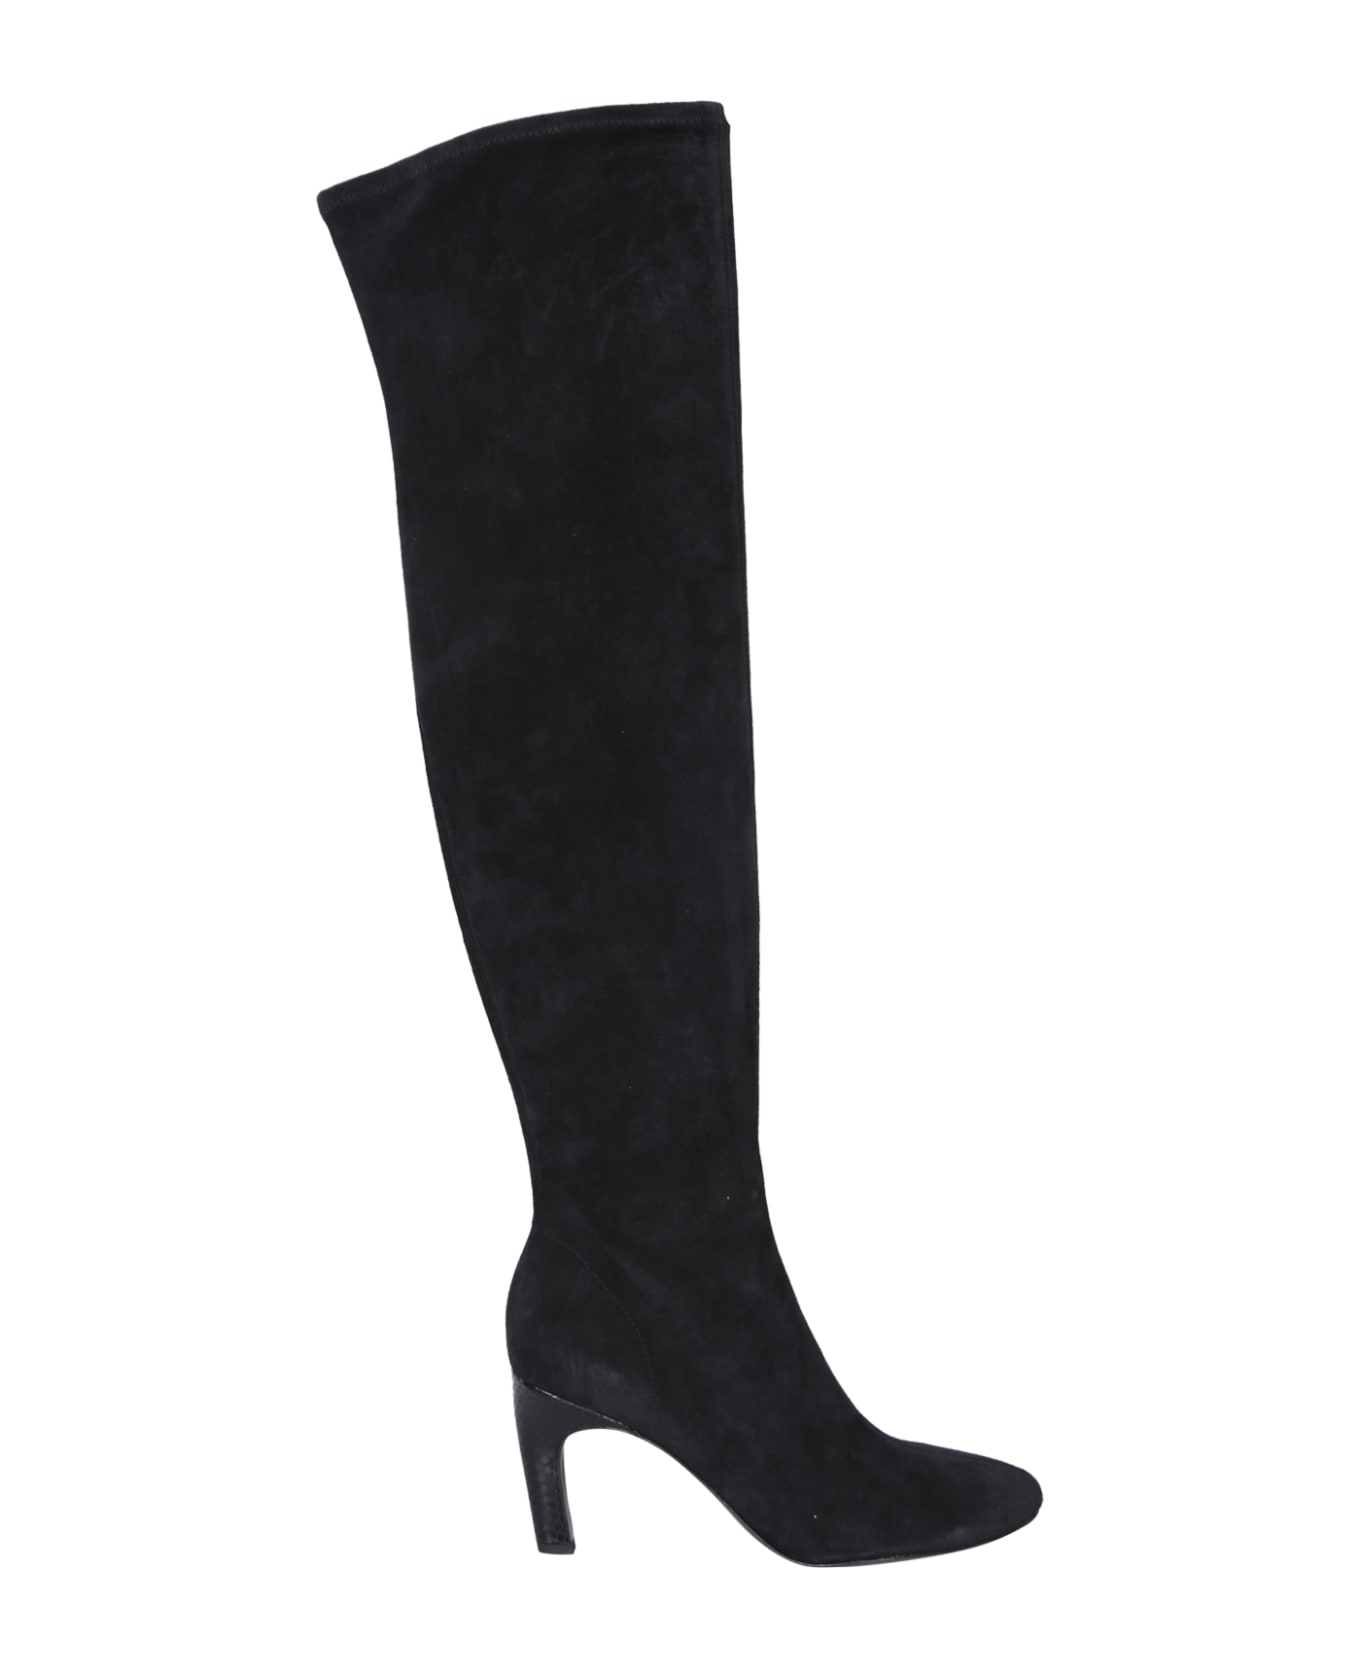 Tory Burch Over The Knee Boots - Black